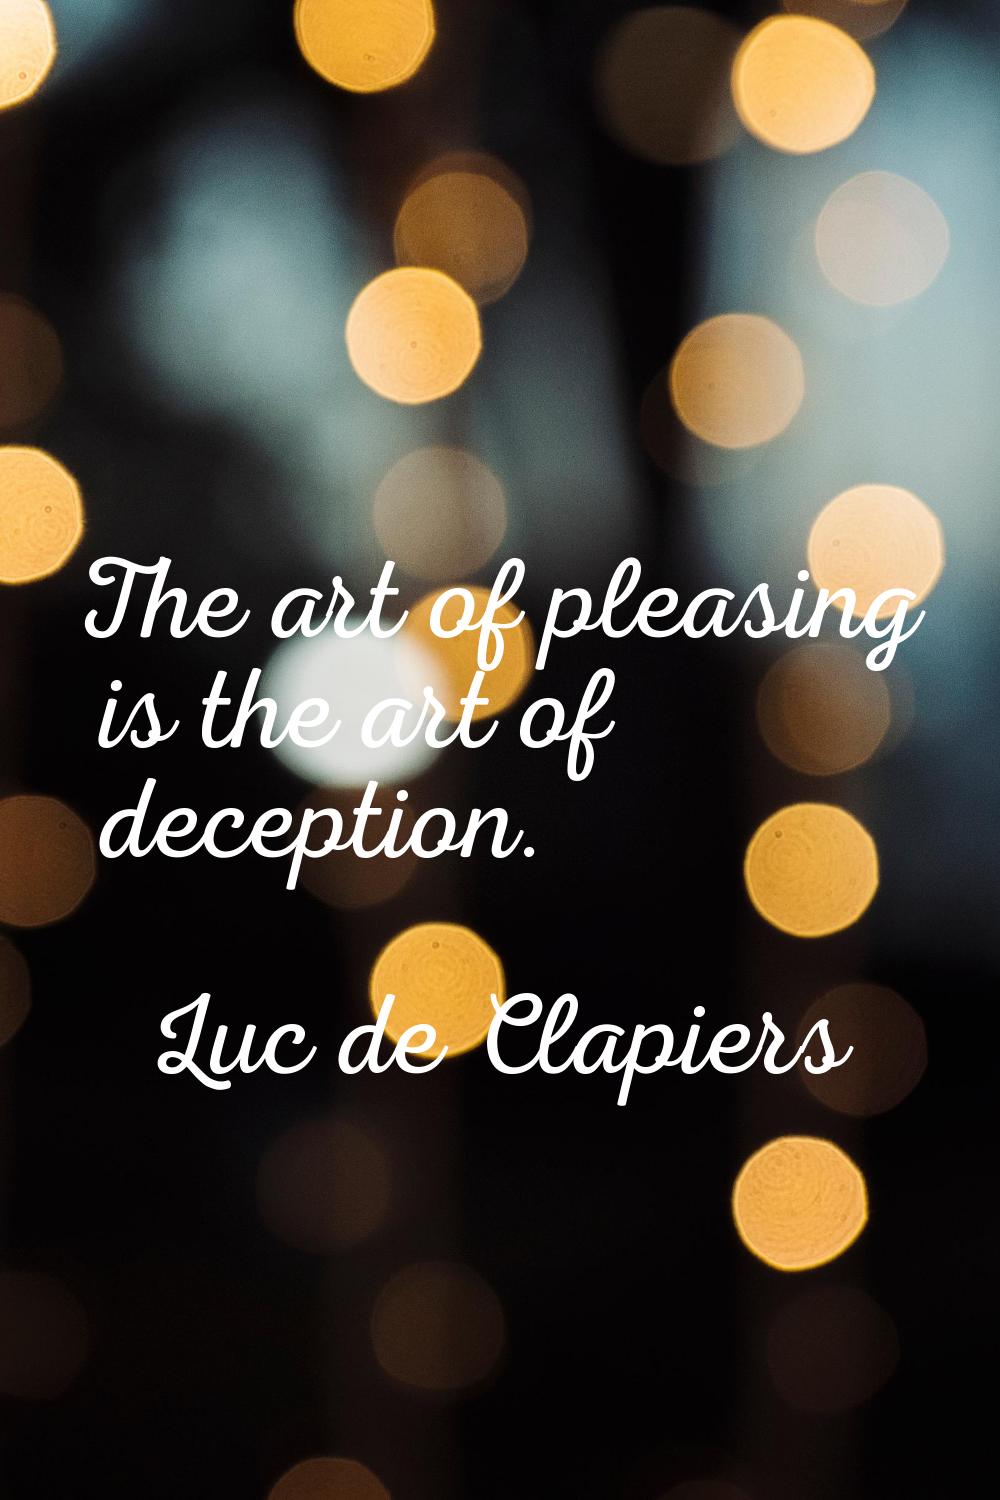 The art of pleasing is the art of deception.